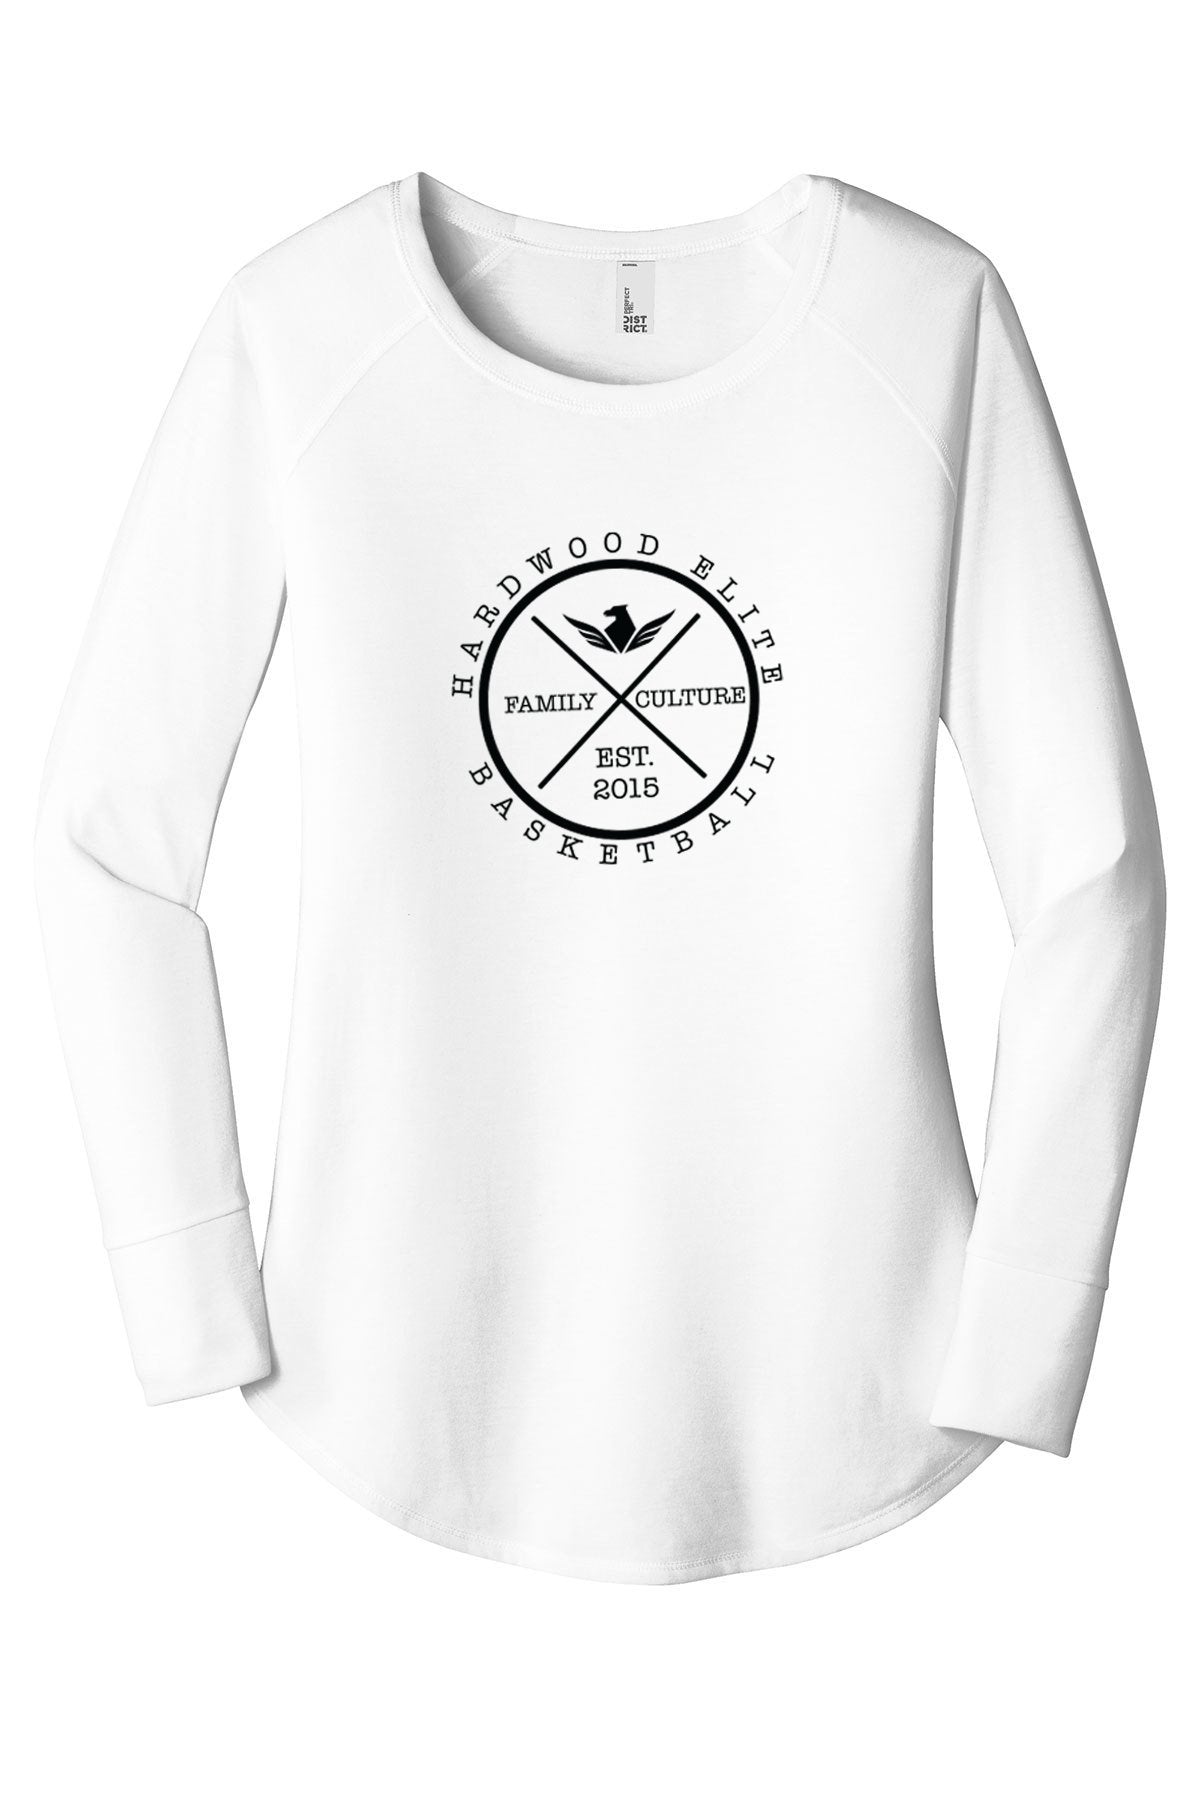 Hardwood - District Women’s Perfect Tri Long Sleeve - White - IMS Apparel DT132White-S